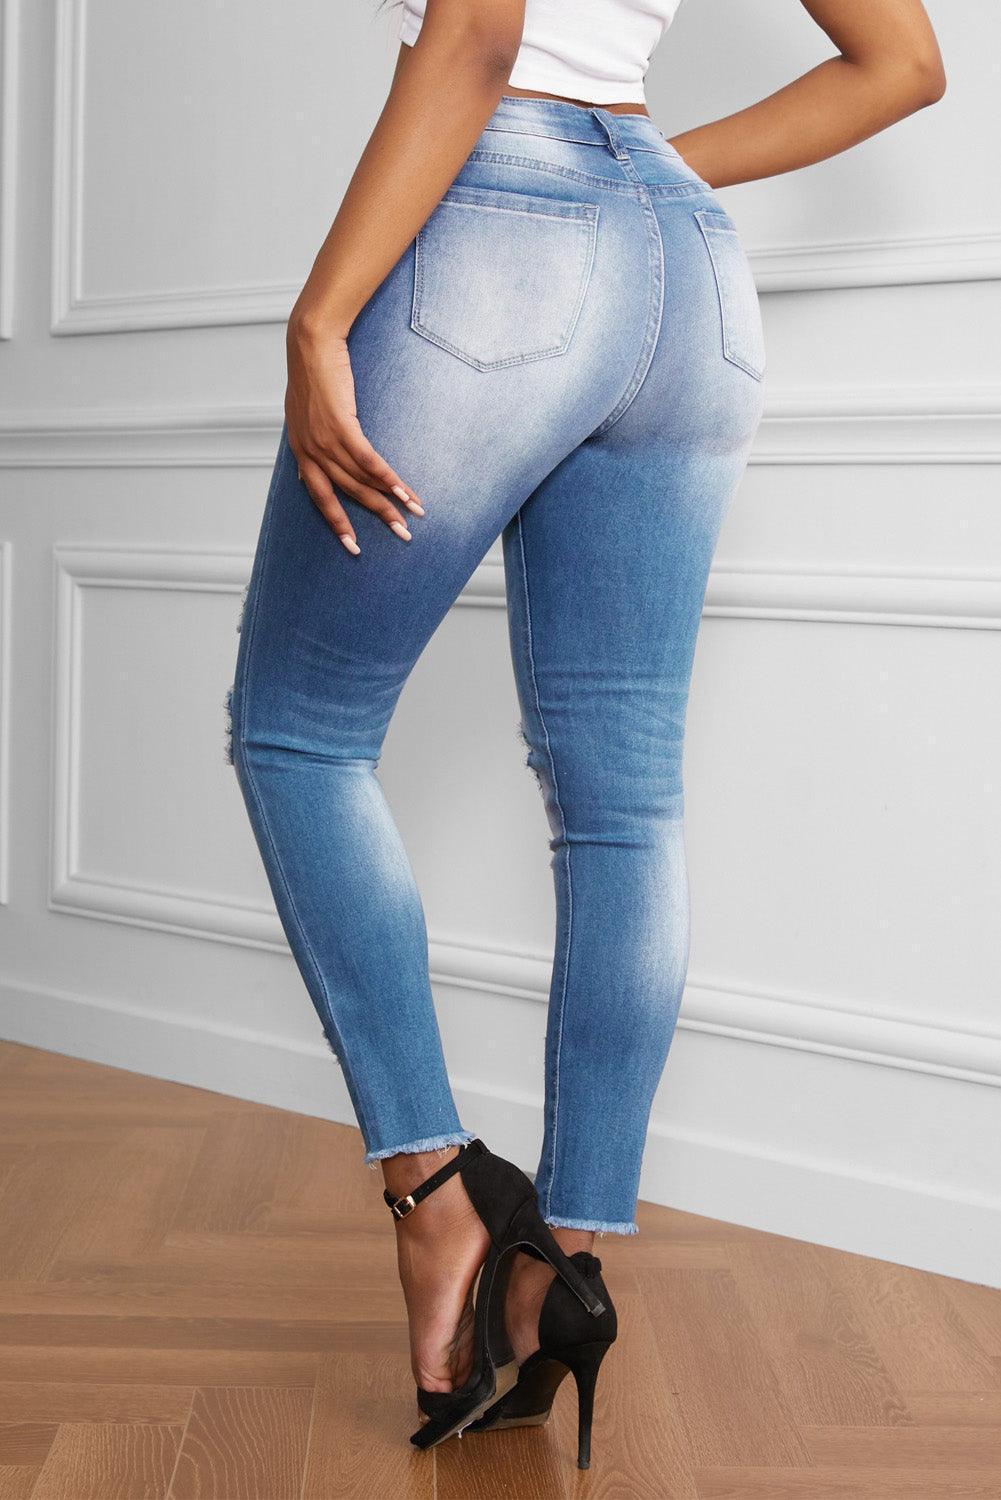 Bootylicious Faded High Rise Skinny Jeans - MXSTUDIO.COM